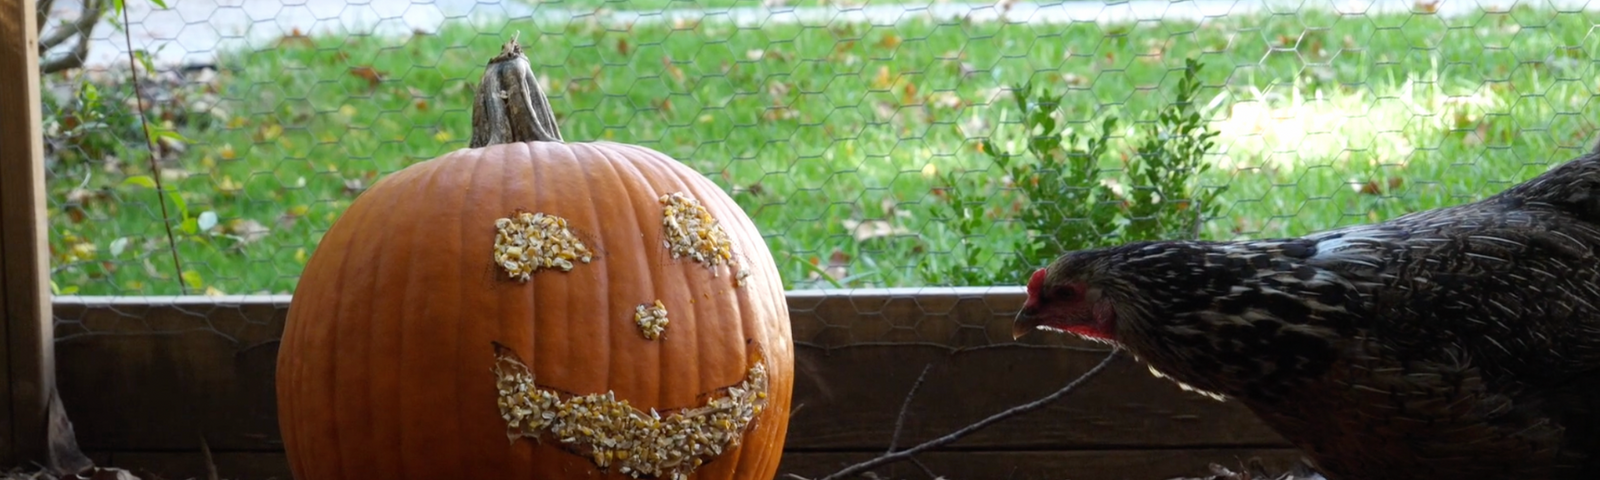 Pumpkin Carving with Chickens